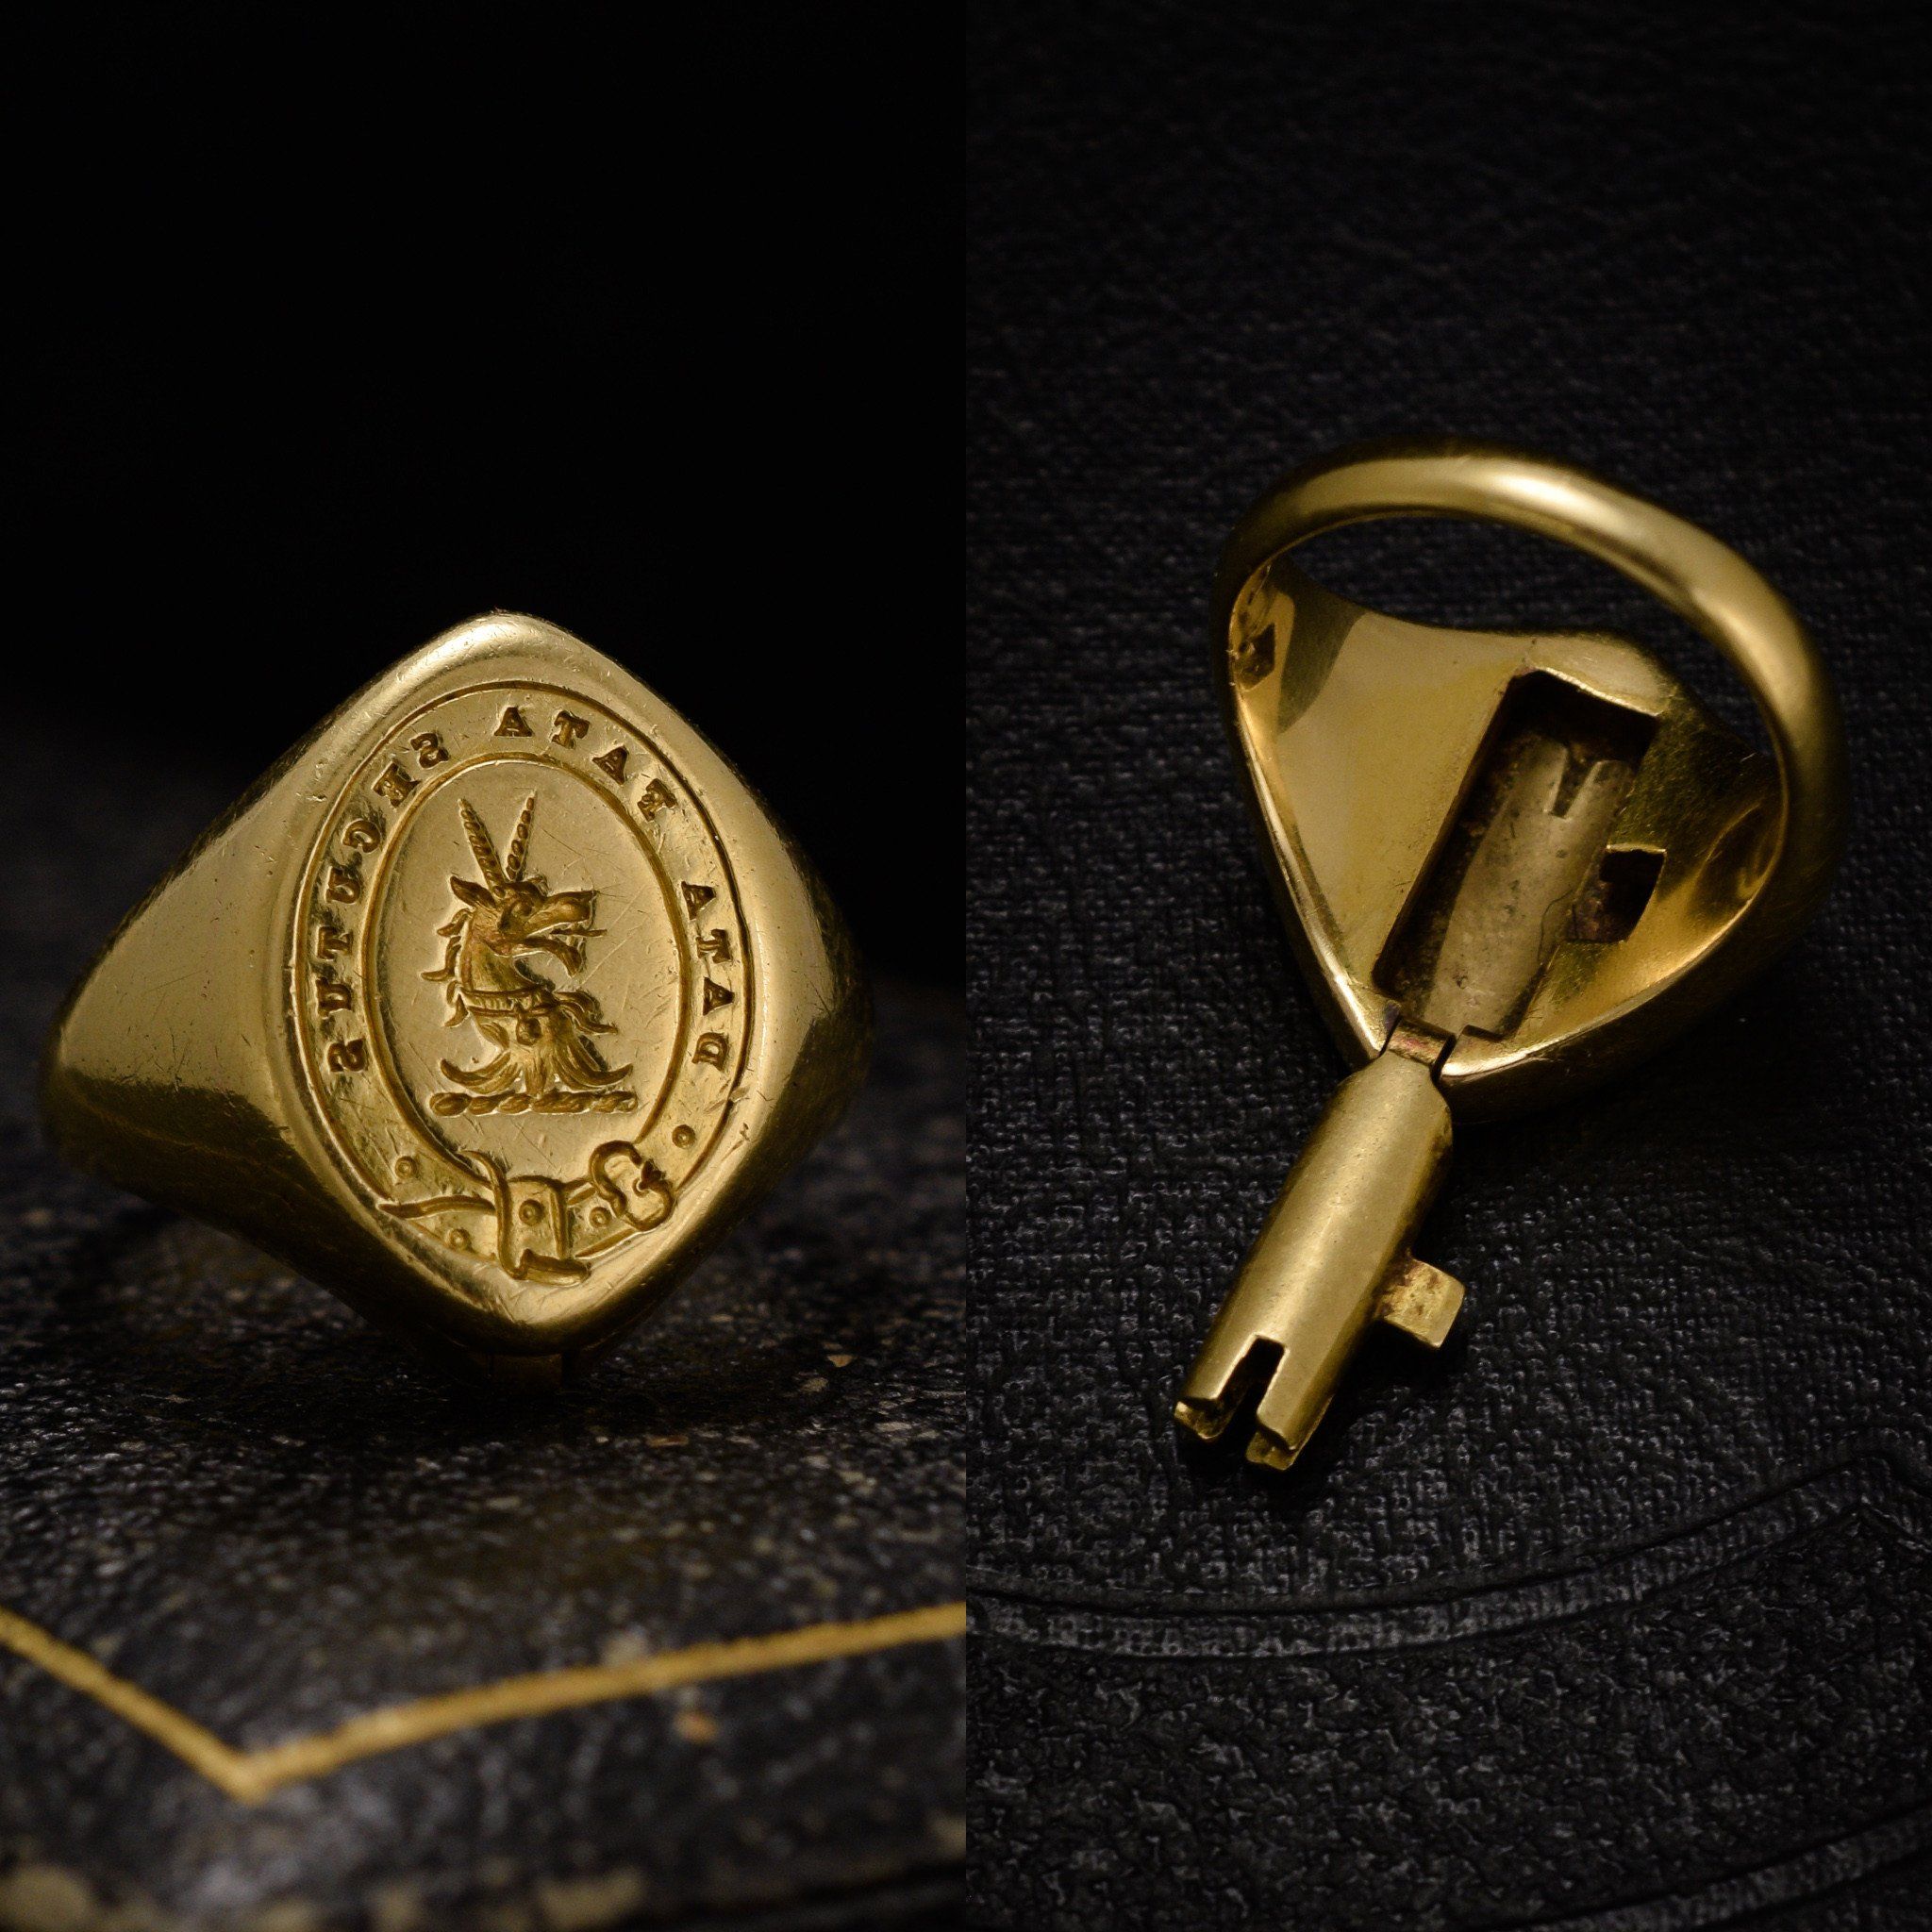 "Data Fata Secutus" Signet Ring with Concealed Jewelry Box Key